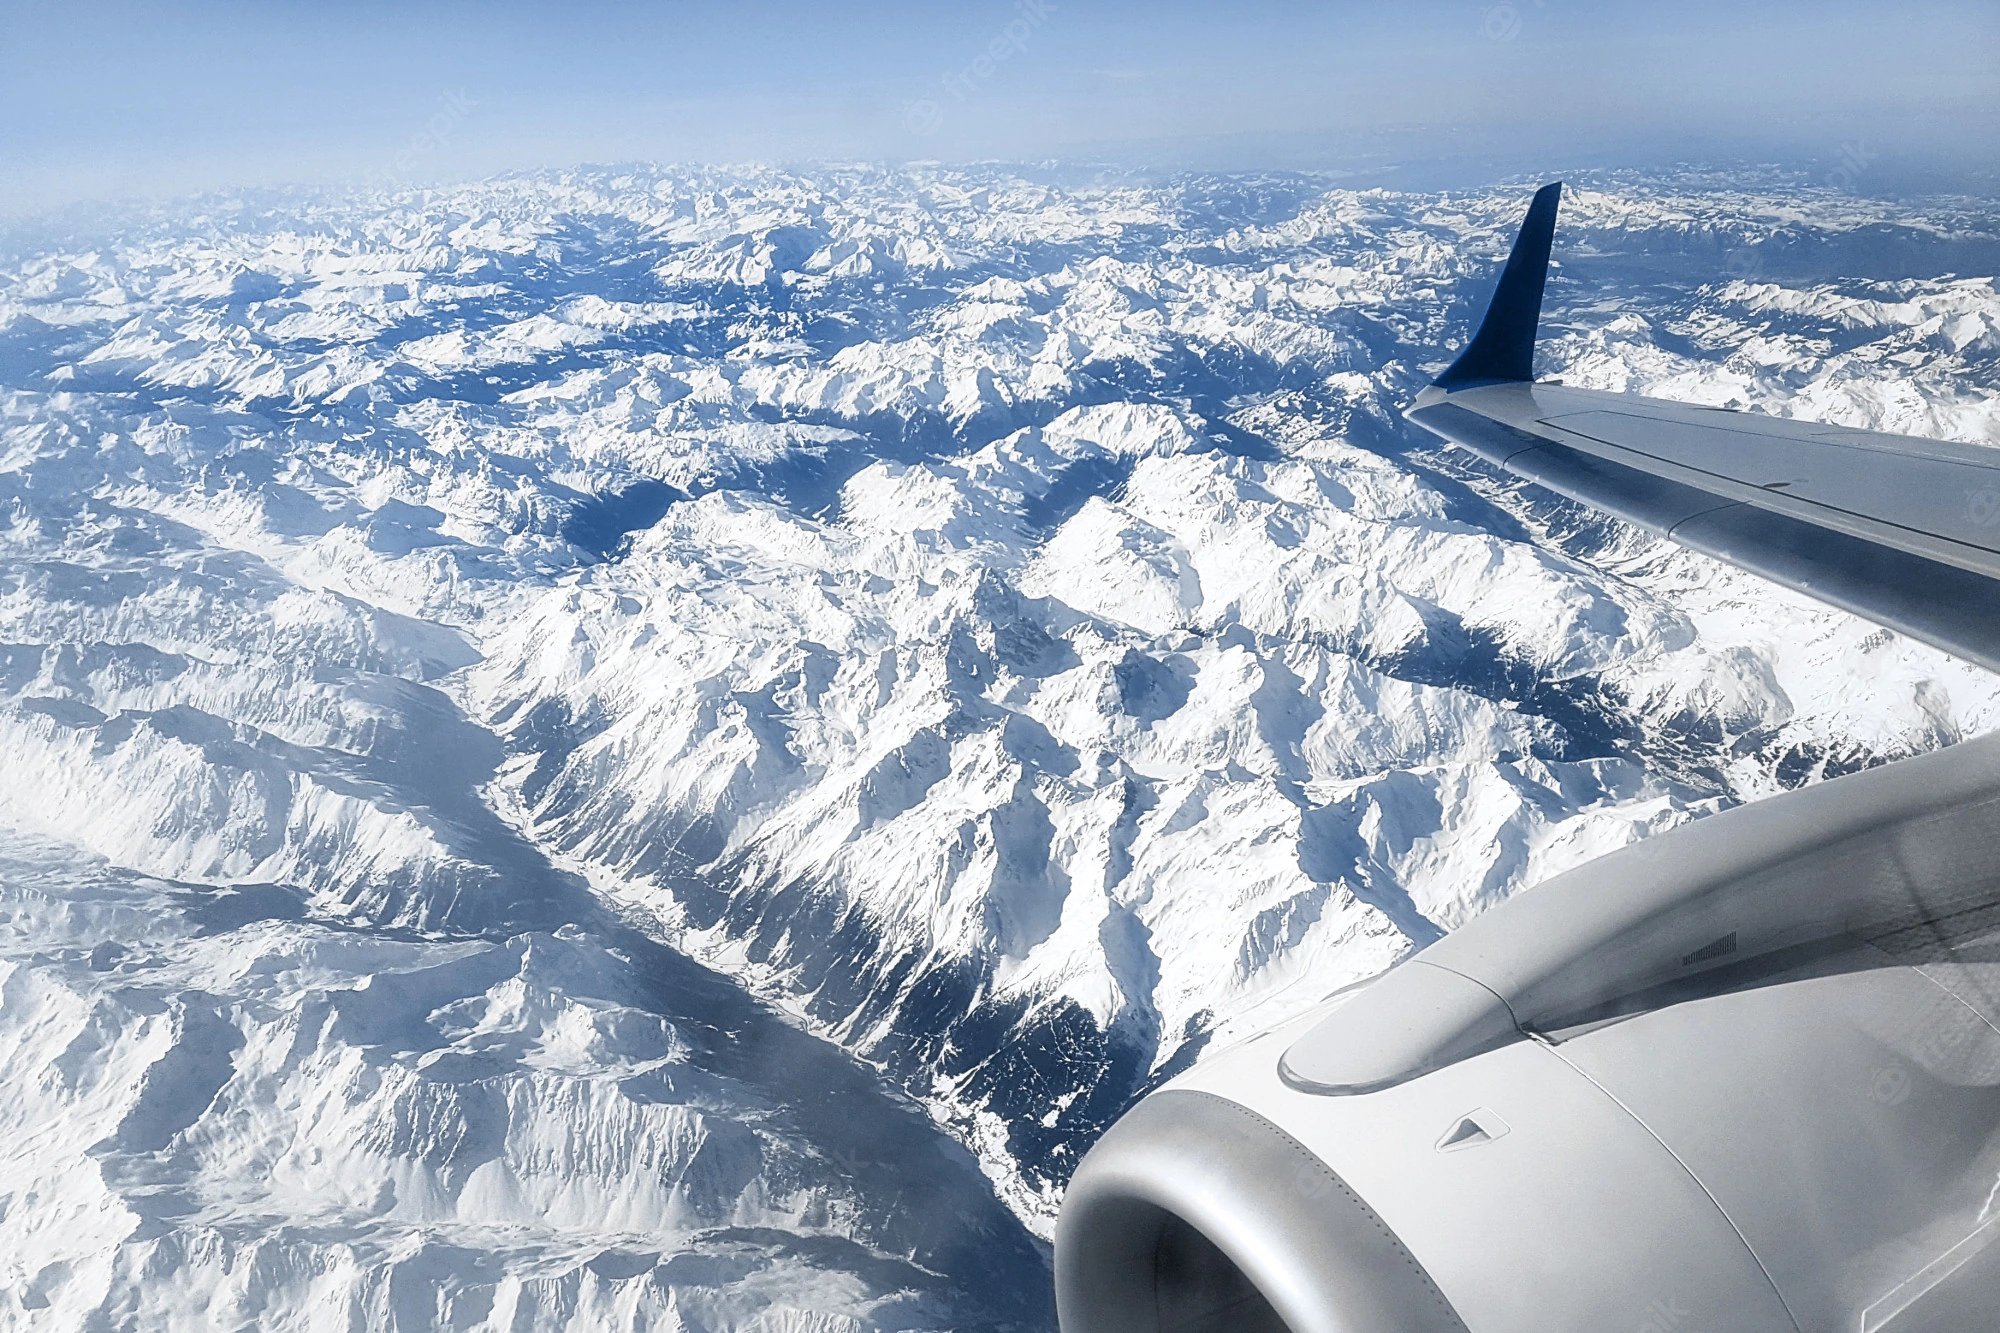 view-from-airplane-window-snow-capped-peaks-alpine-mountains-engine-aircraft_94065-298